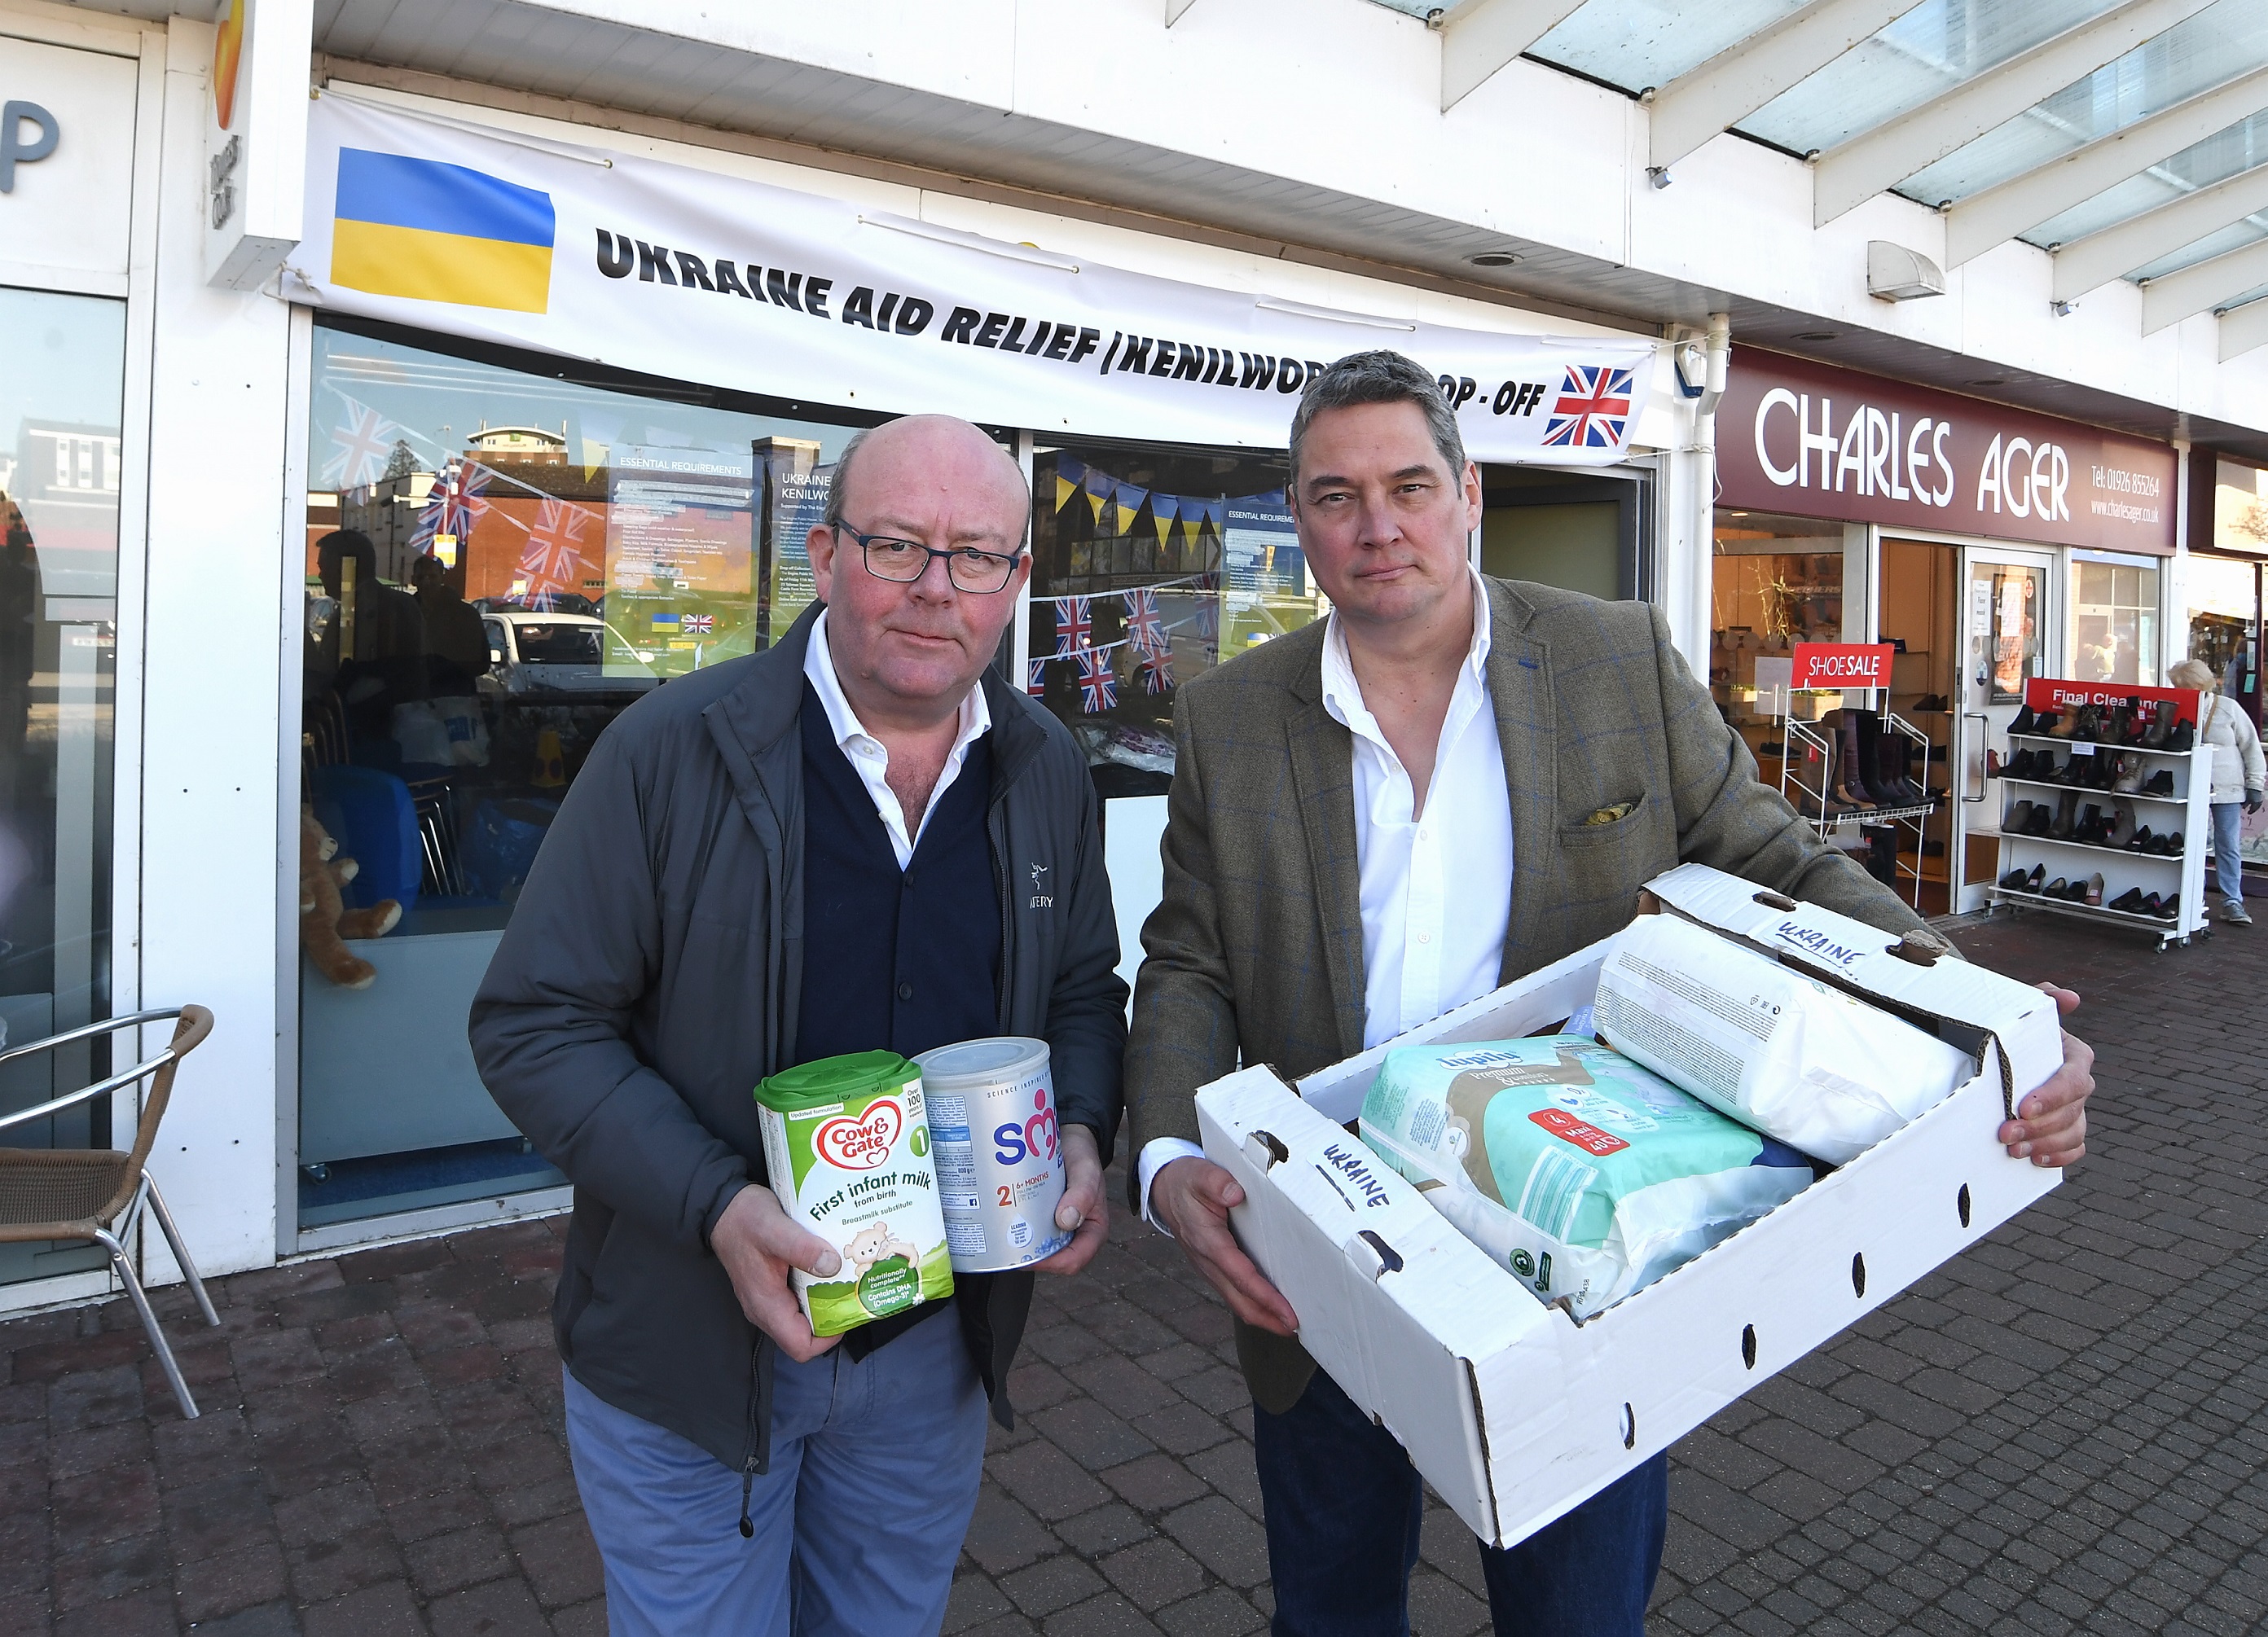 Wareing & Co offers base in Kenilworth for Ukraine donations pop-up shop